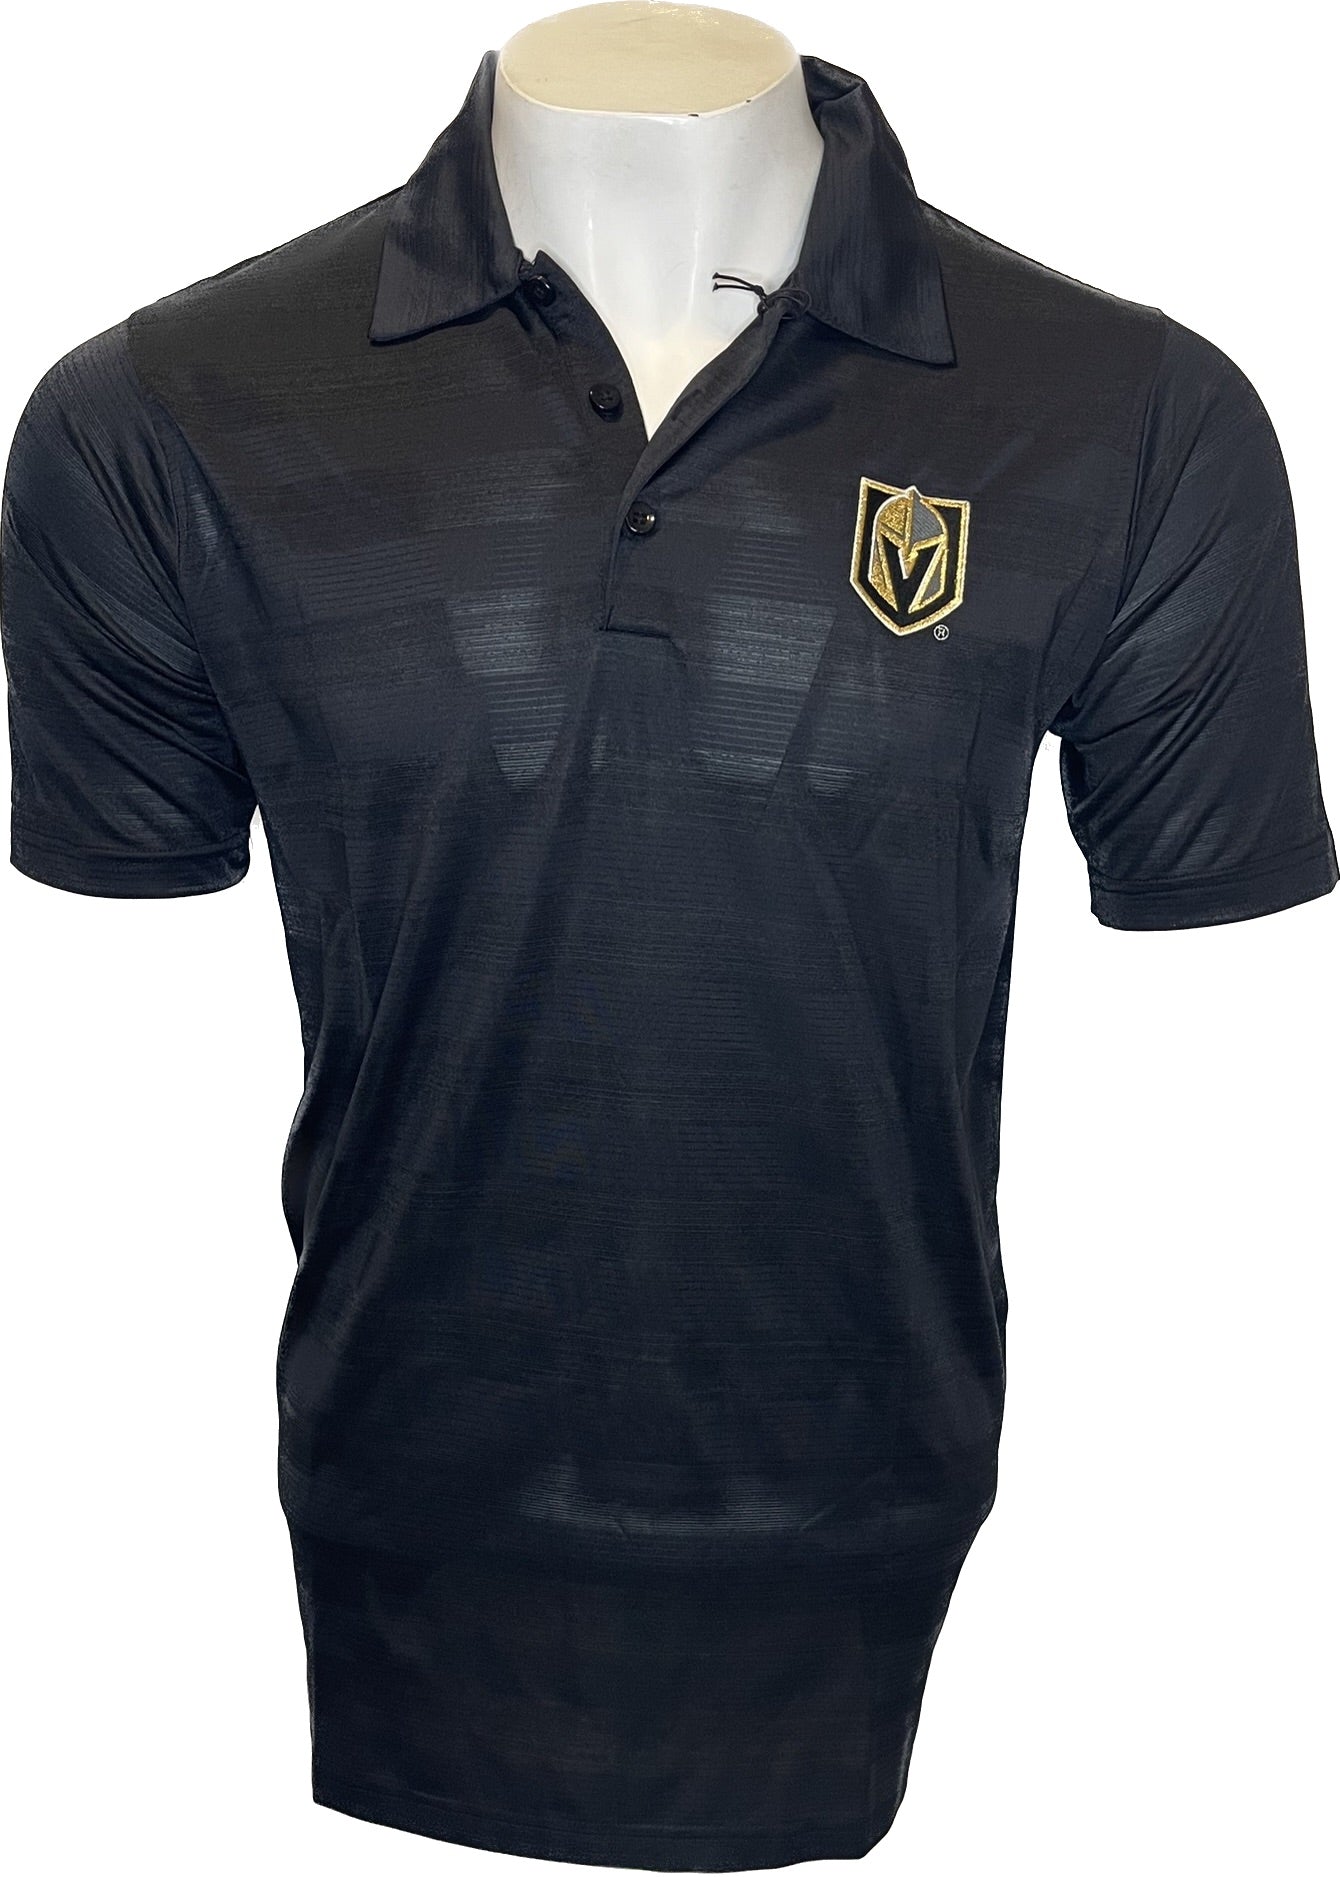 Vegas Golden Knights Mens Compass Polo - Black With Shield Logo